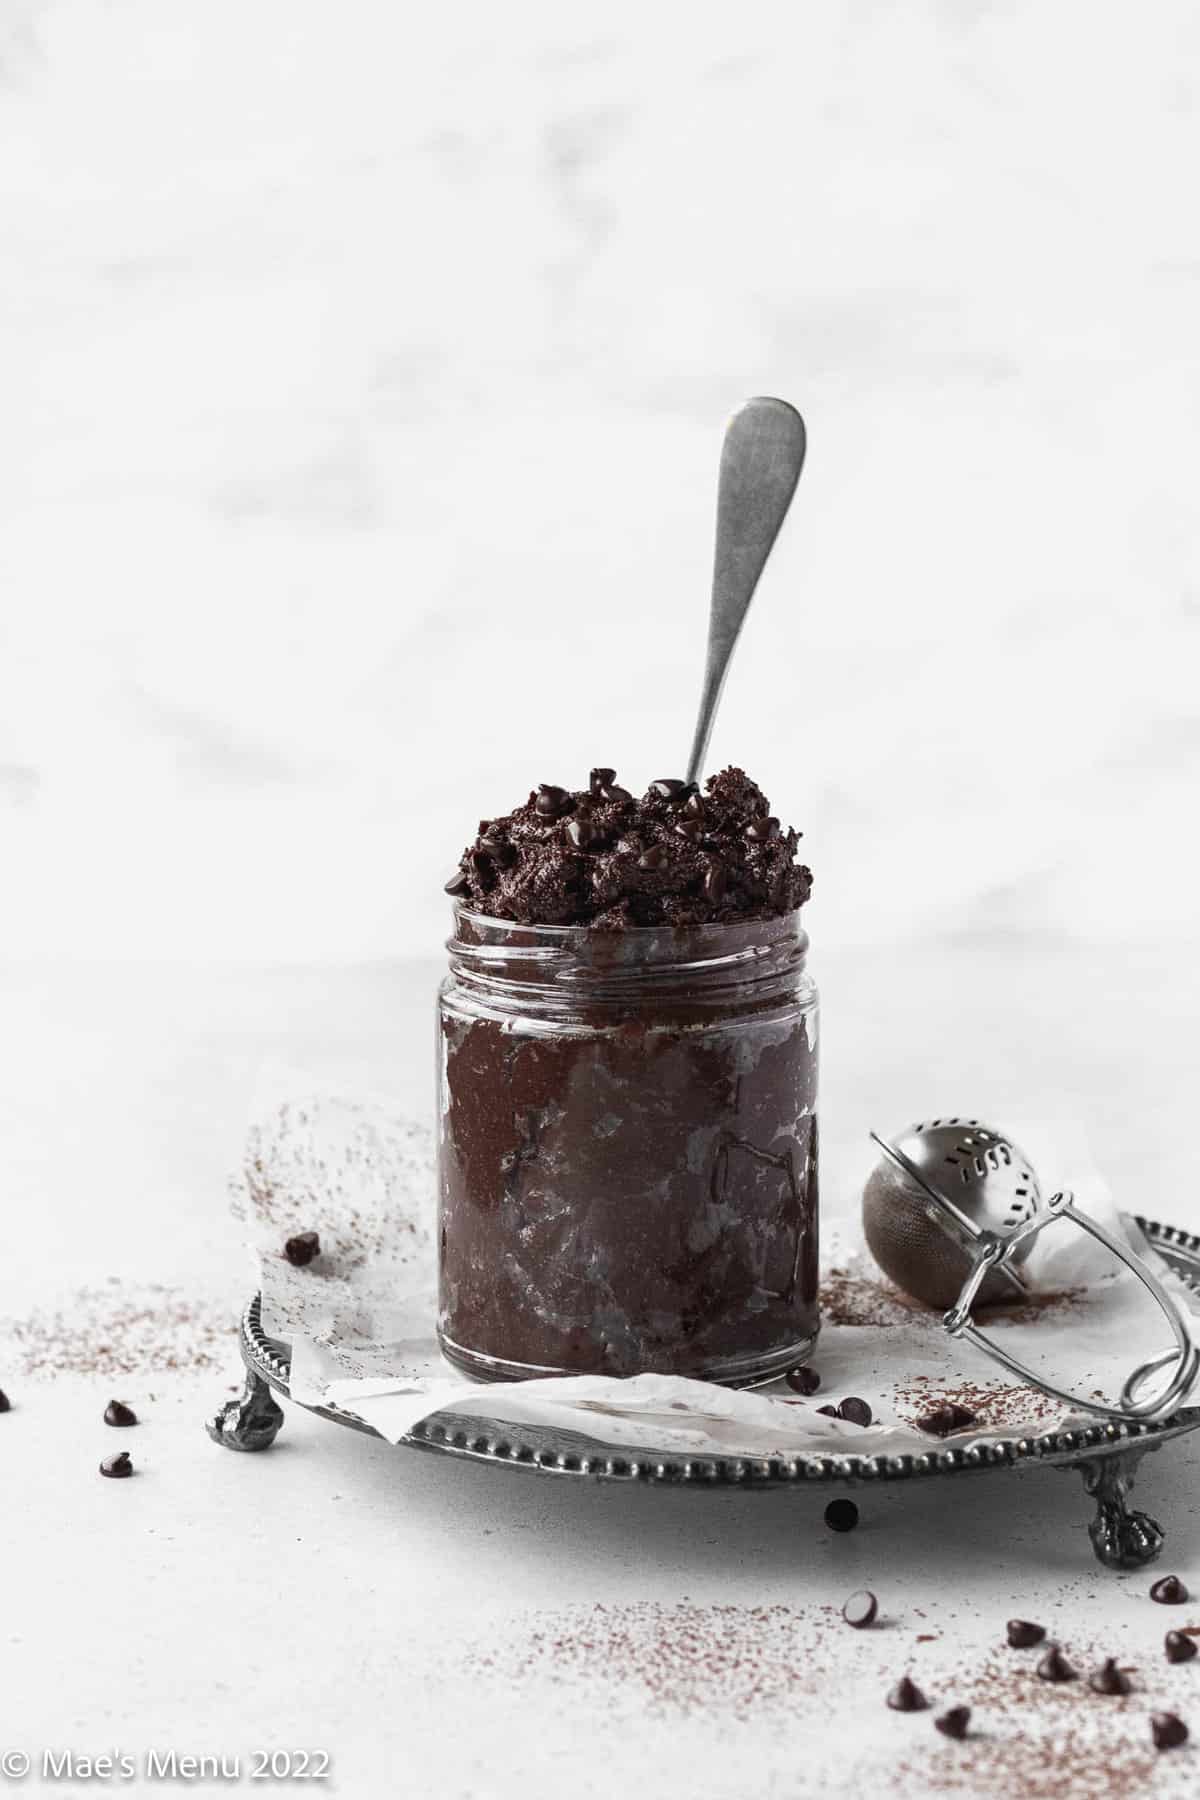 spoon in a jar of edible brownie batter made without eggs.